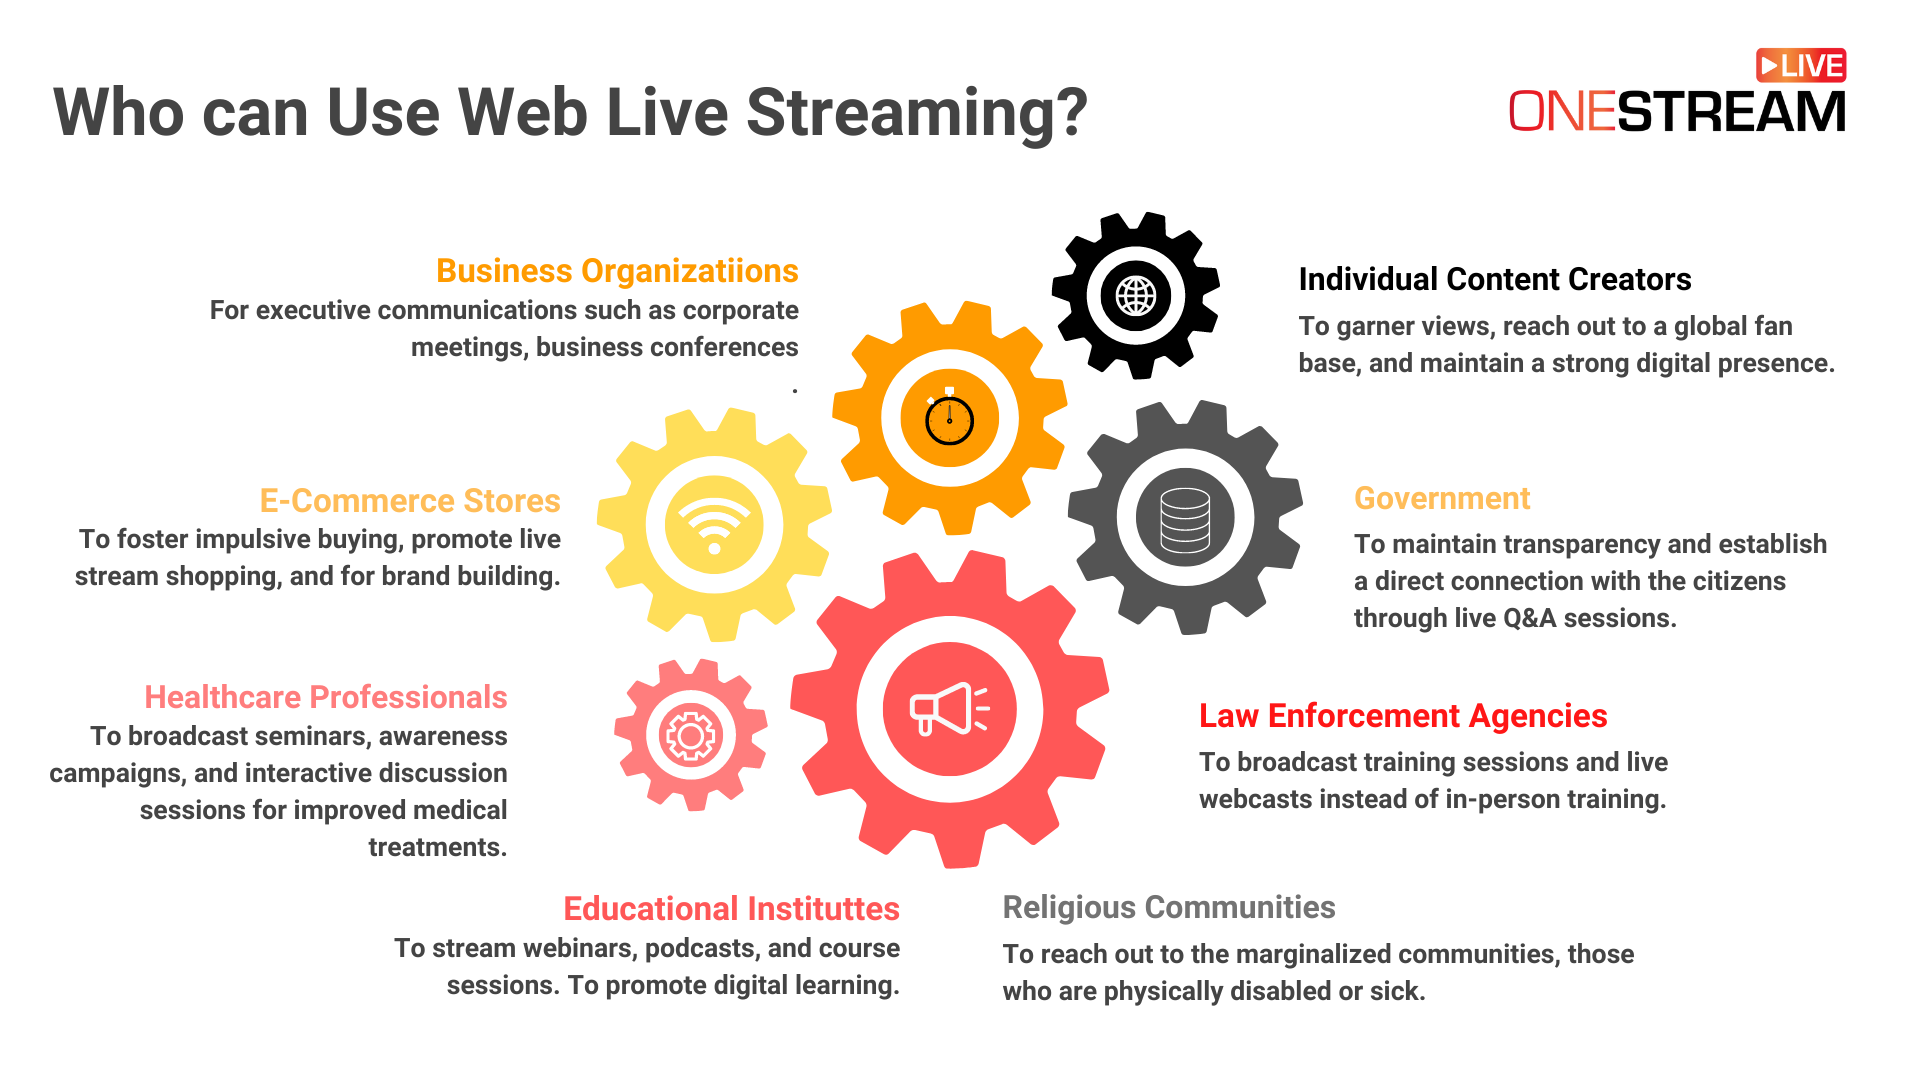 Who can use web live streaming